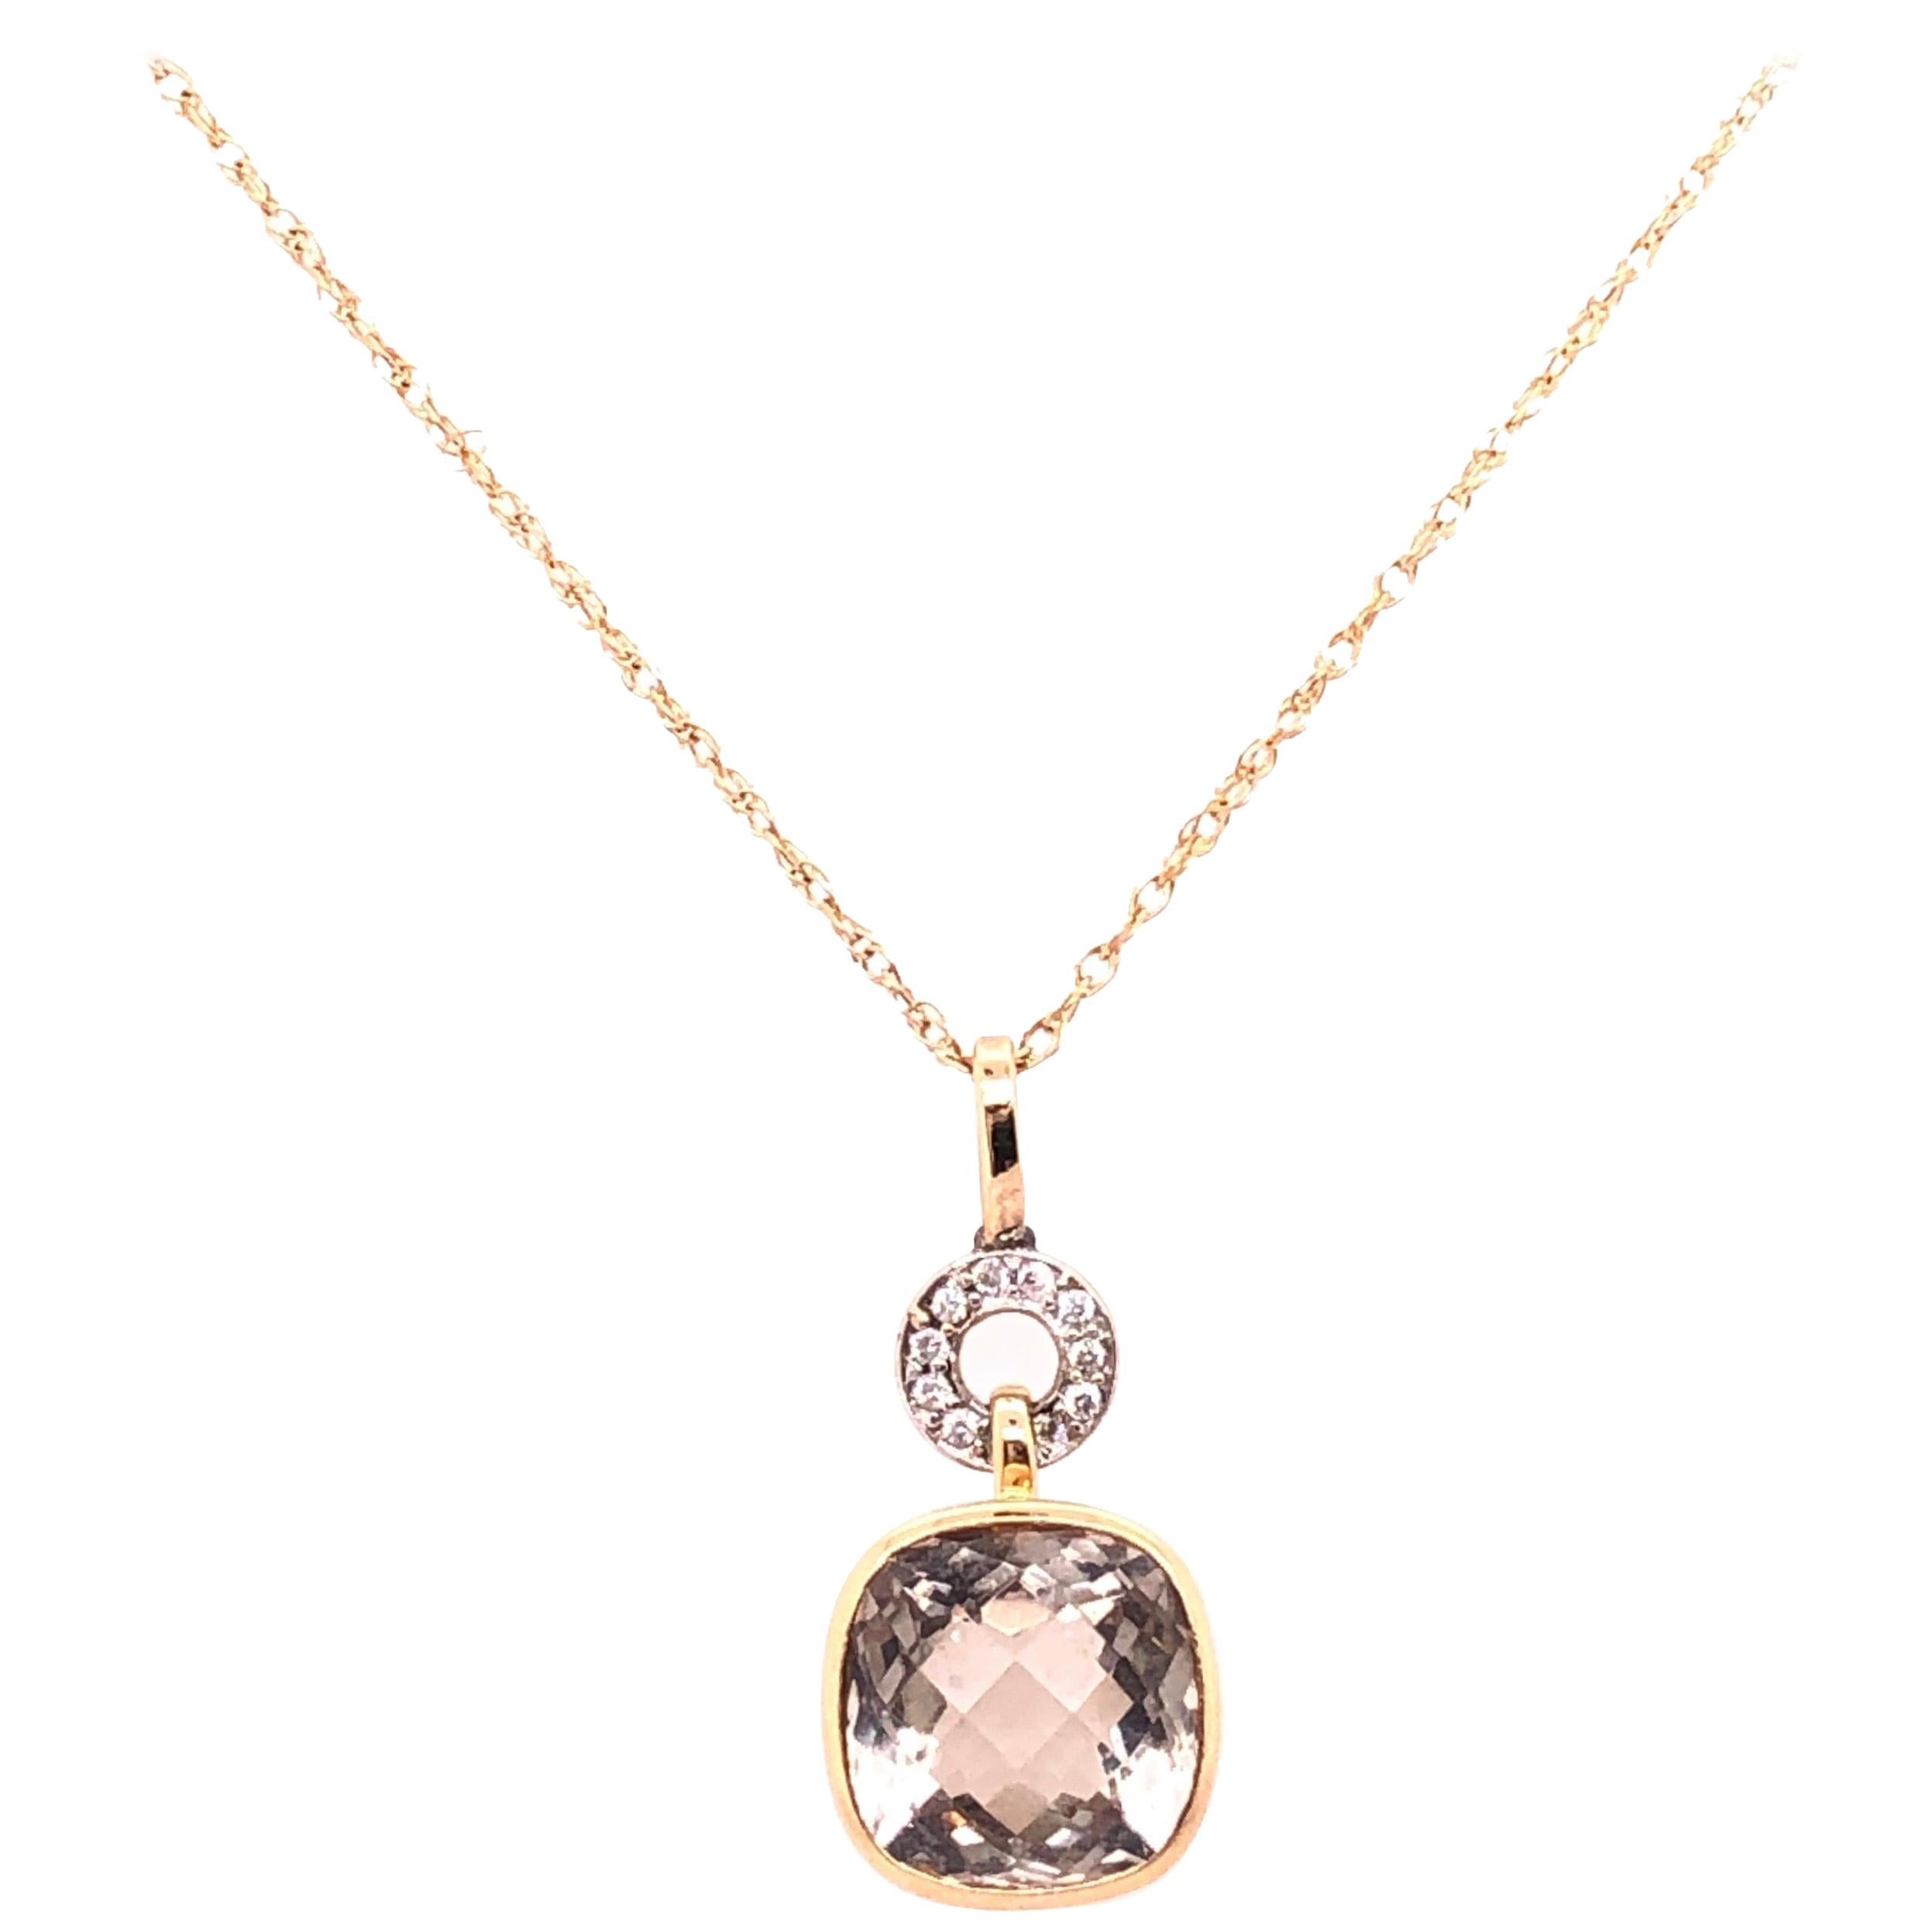 14 Karat Gold Necklace with Round Sapphire and Diamond Pendant For Sale